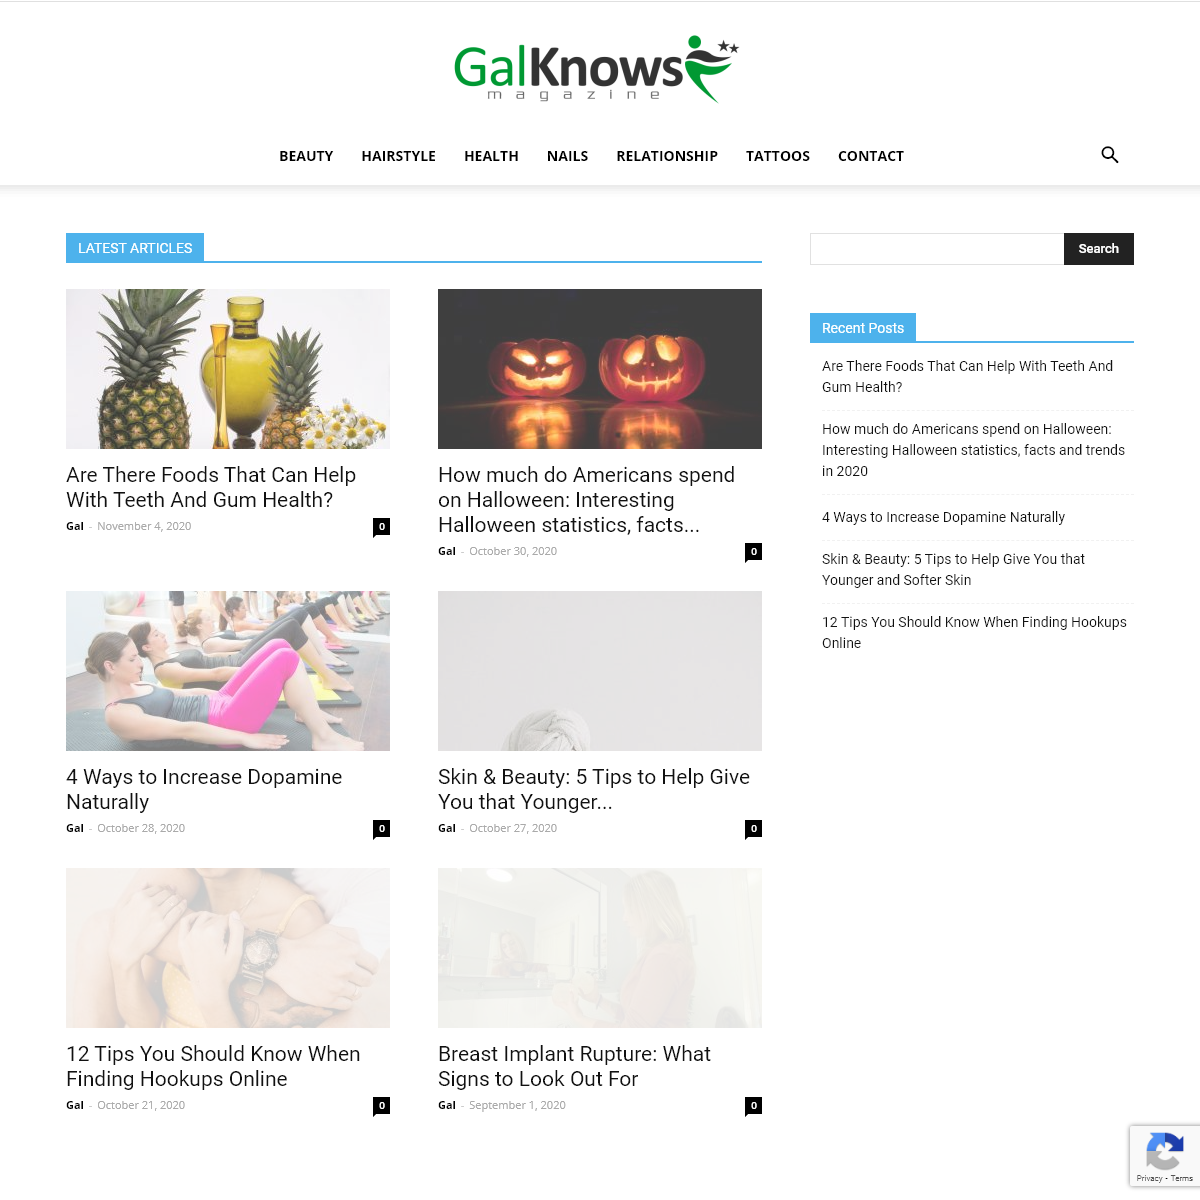 A complete backup of galknows.com